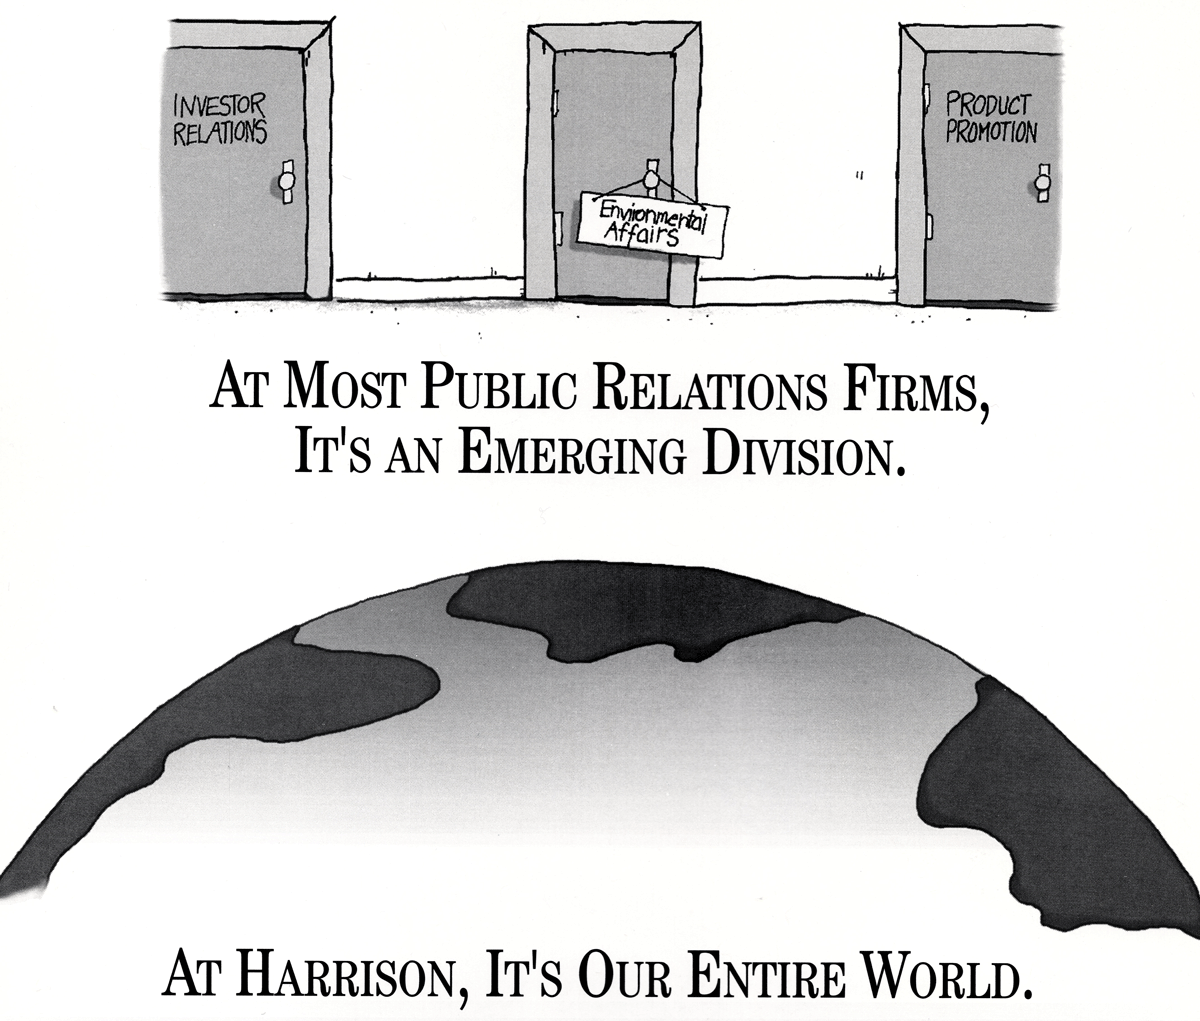 Promotional artwork for Harrison's company - &quot;At most public relations firms, it's an emerging division [Environmental Affairs]. At Harrison, it's our entire world.&quot;